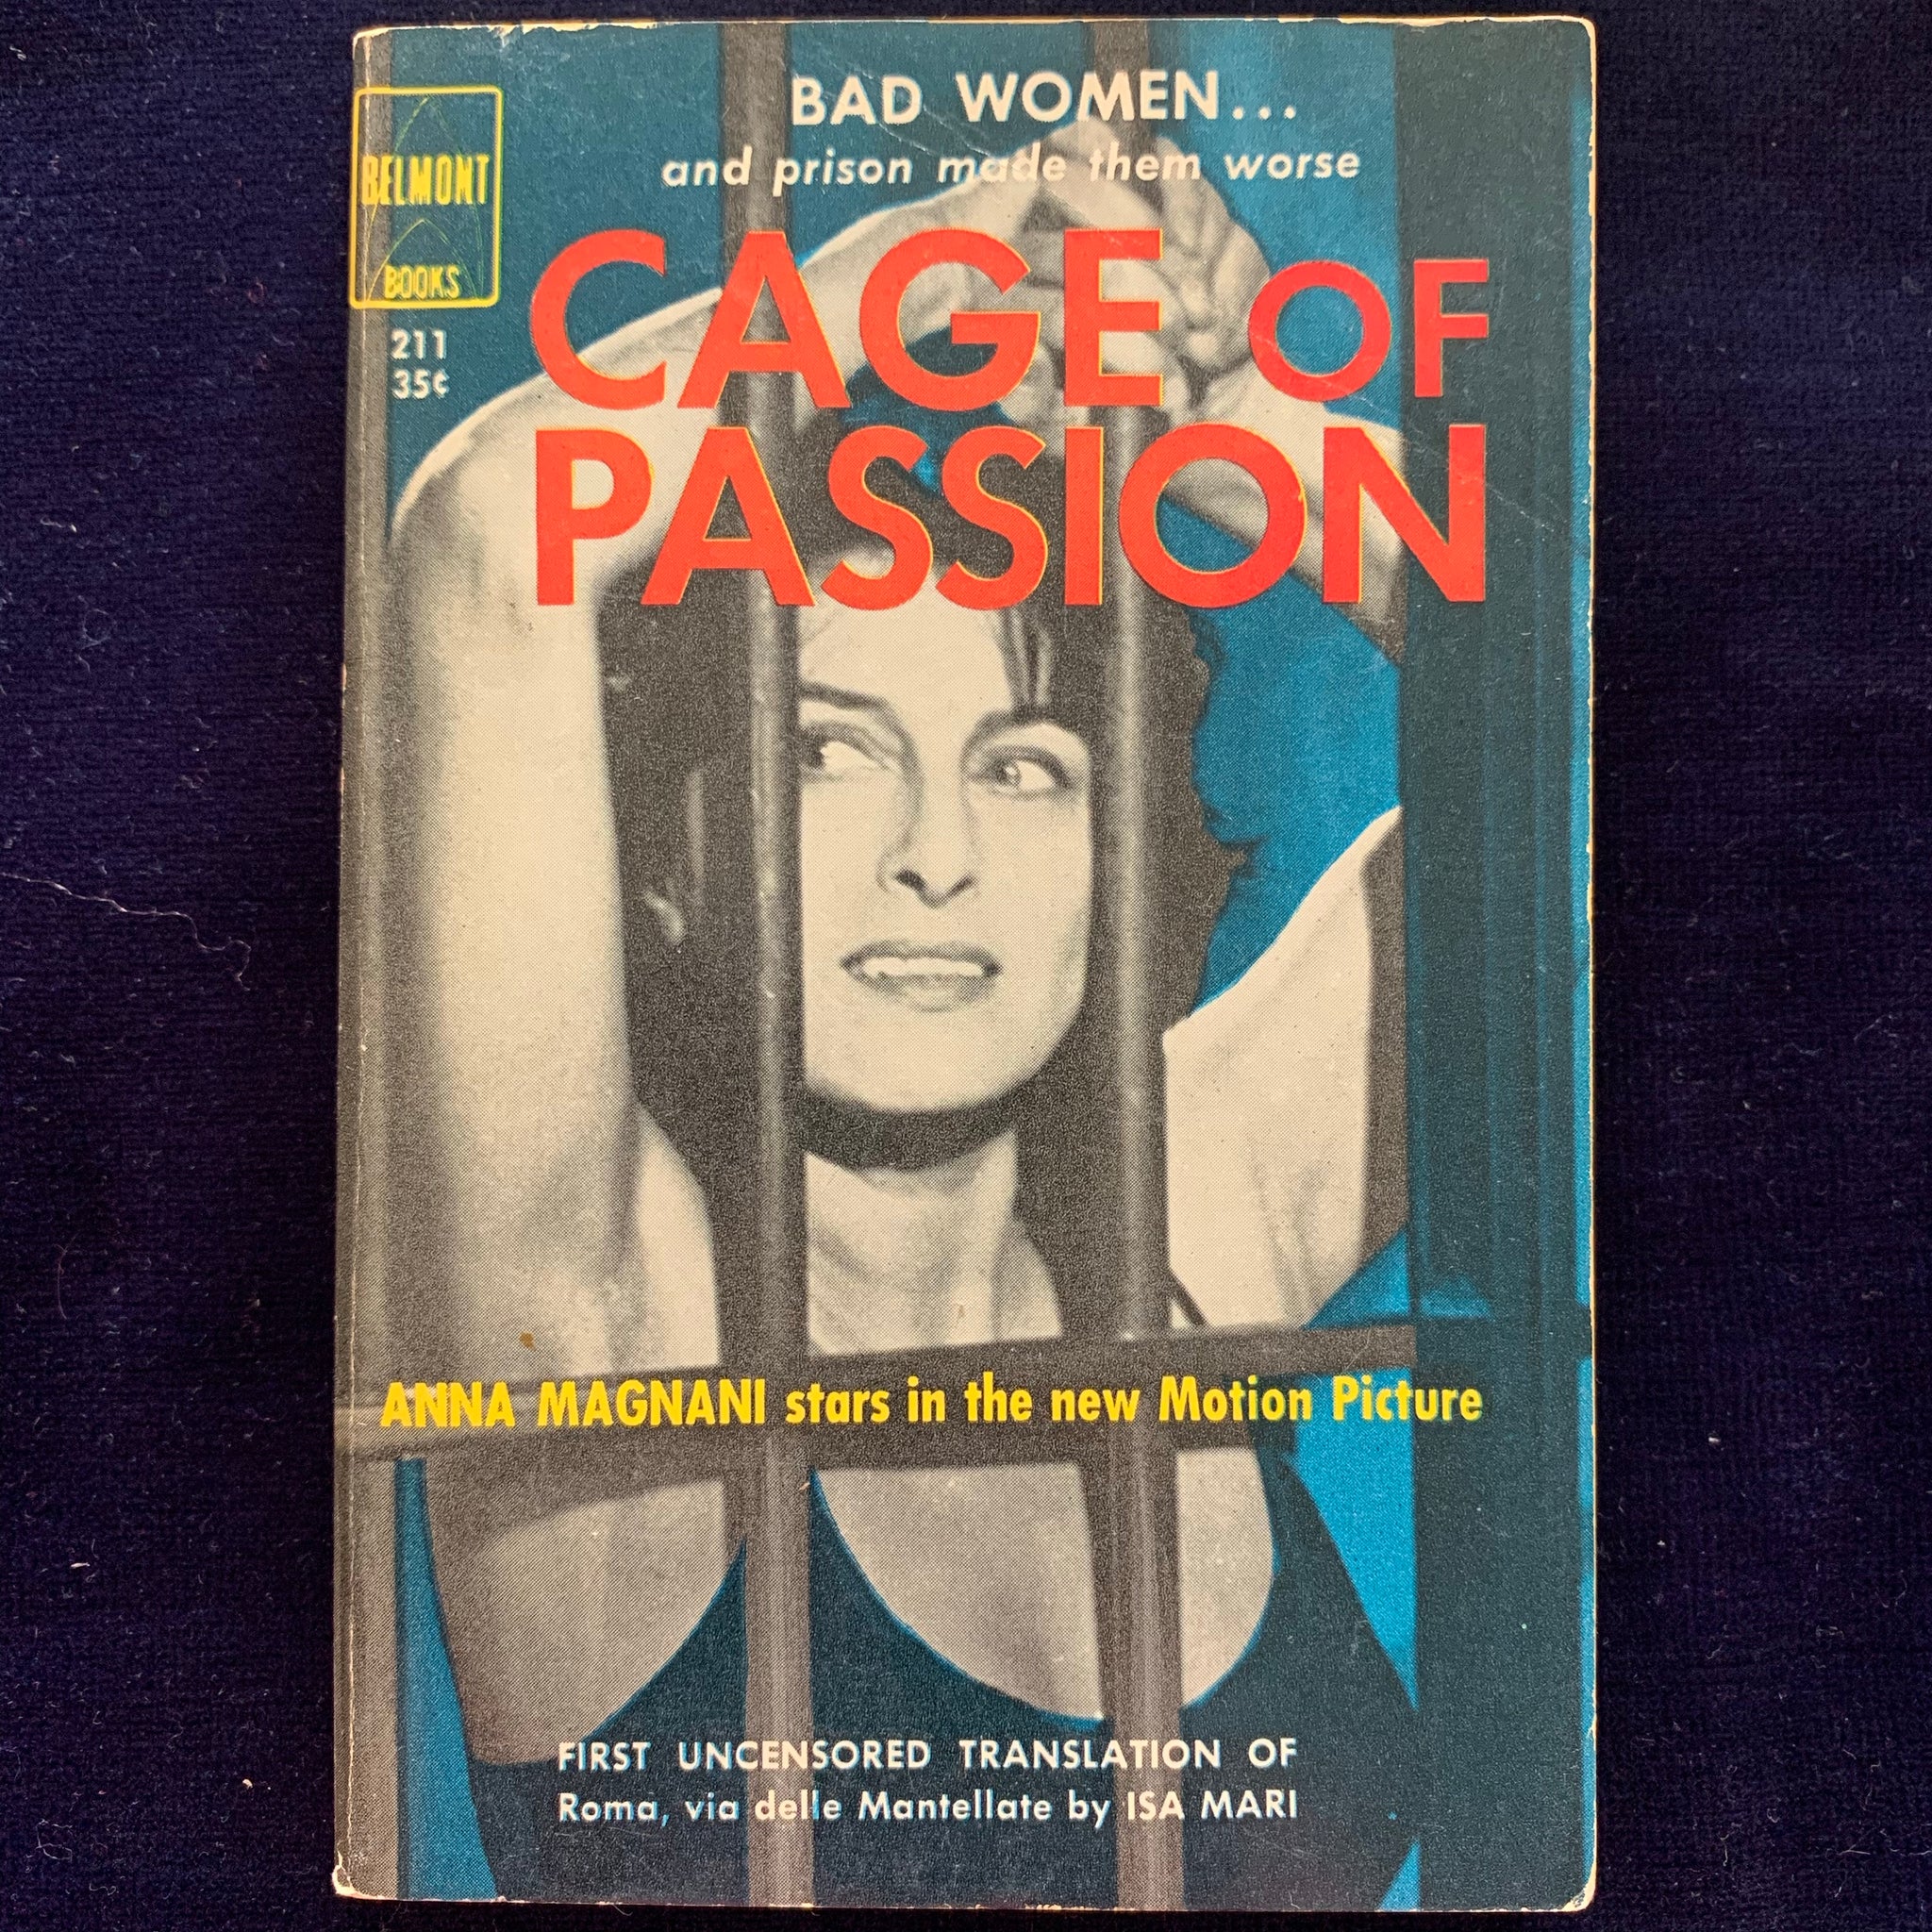 Cage of Passion